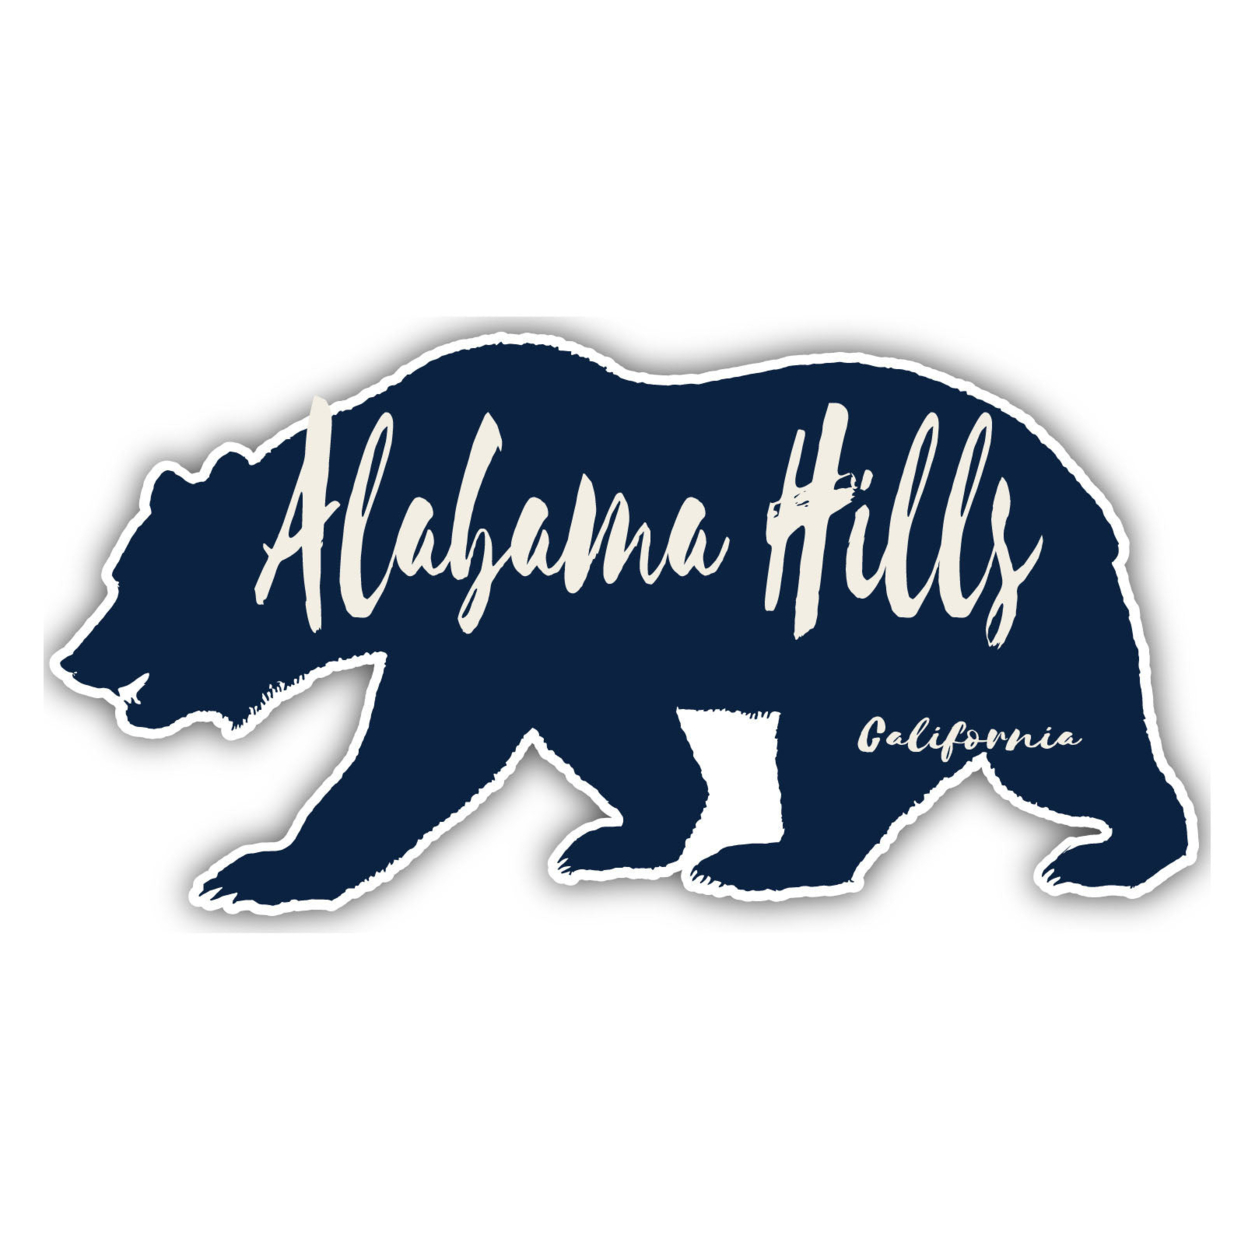 Alabama Hills California Souvenir Decorative Stickers (Choose Theme And Size) - Single Unit, 4-Inch, Great Outdoors